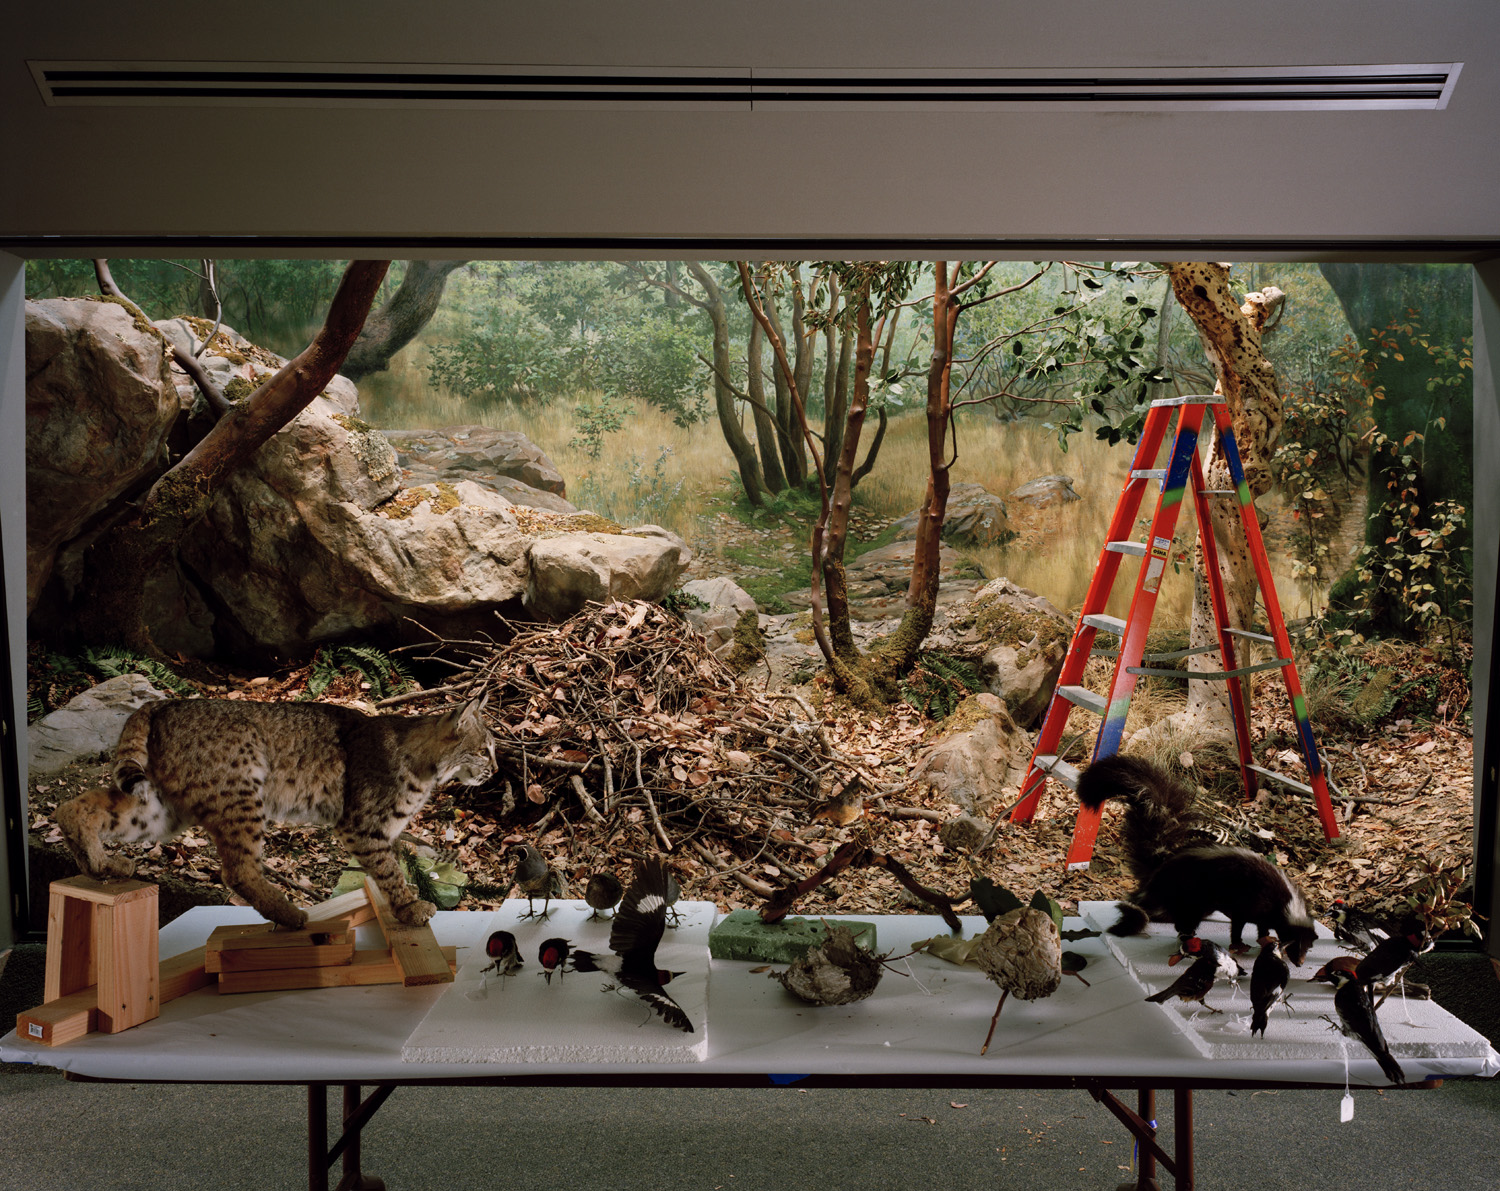  Diorama with Bobcat Removal, 2005 